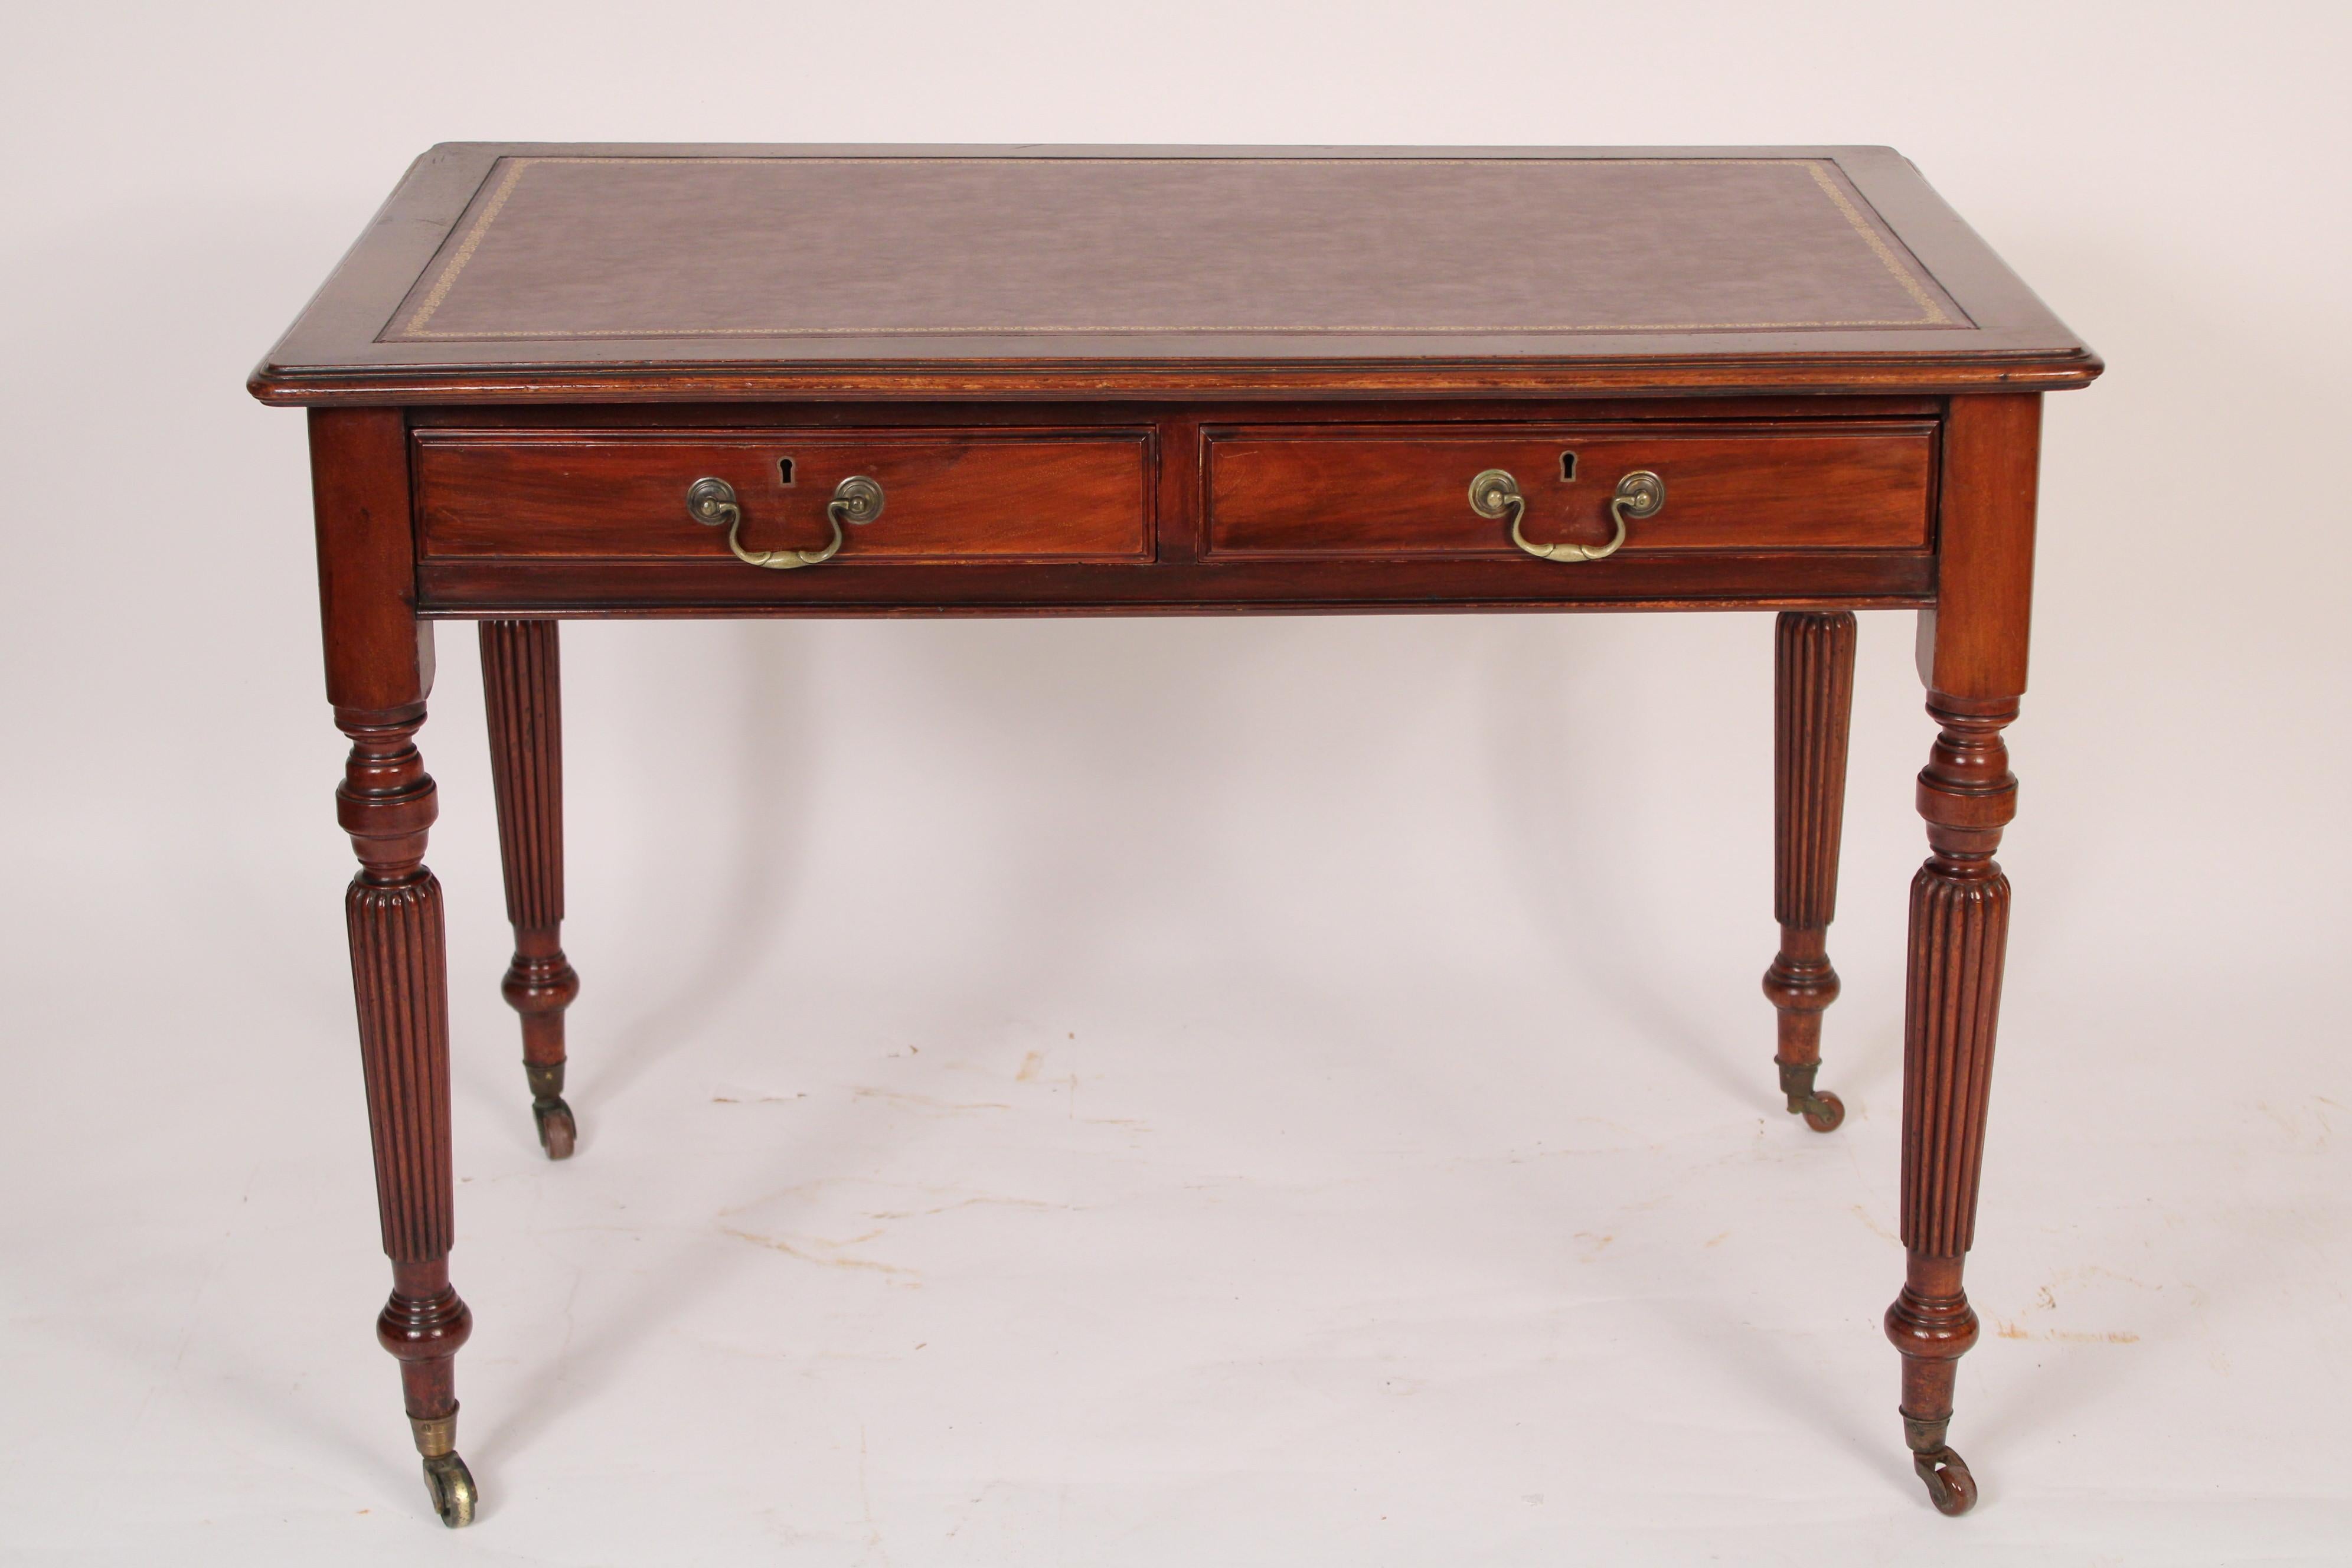 English regency mahogany writing table, 19th century. With a tooled leather top, two frieze drawers with lever locks, four tapered reeded legs ending in brass casters. Hand dove tailed drawer construction. Knee clearance 23.25